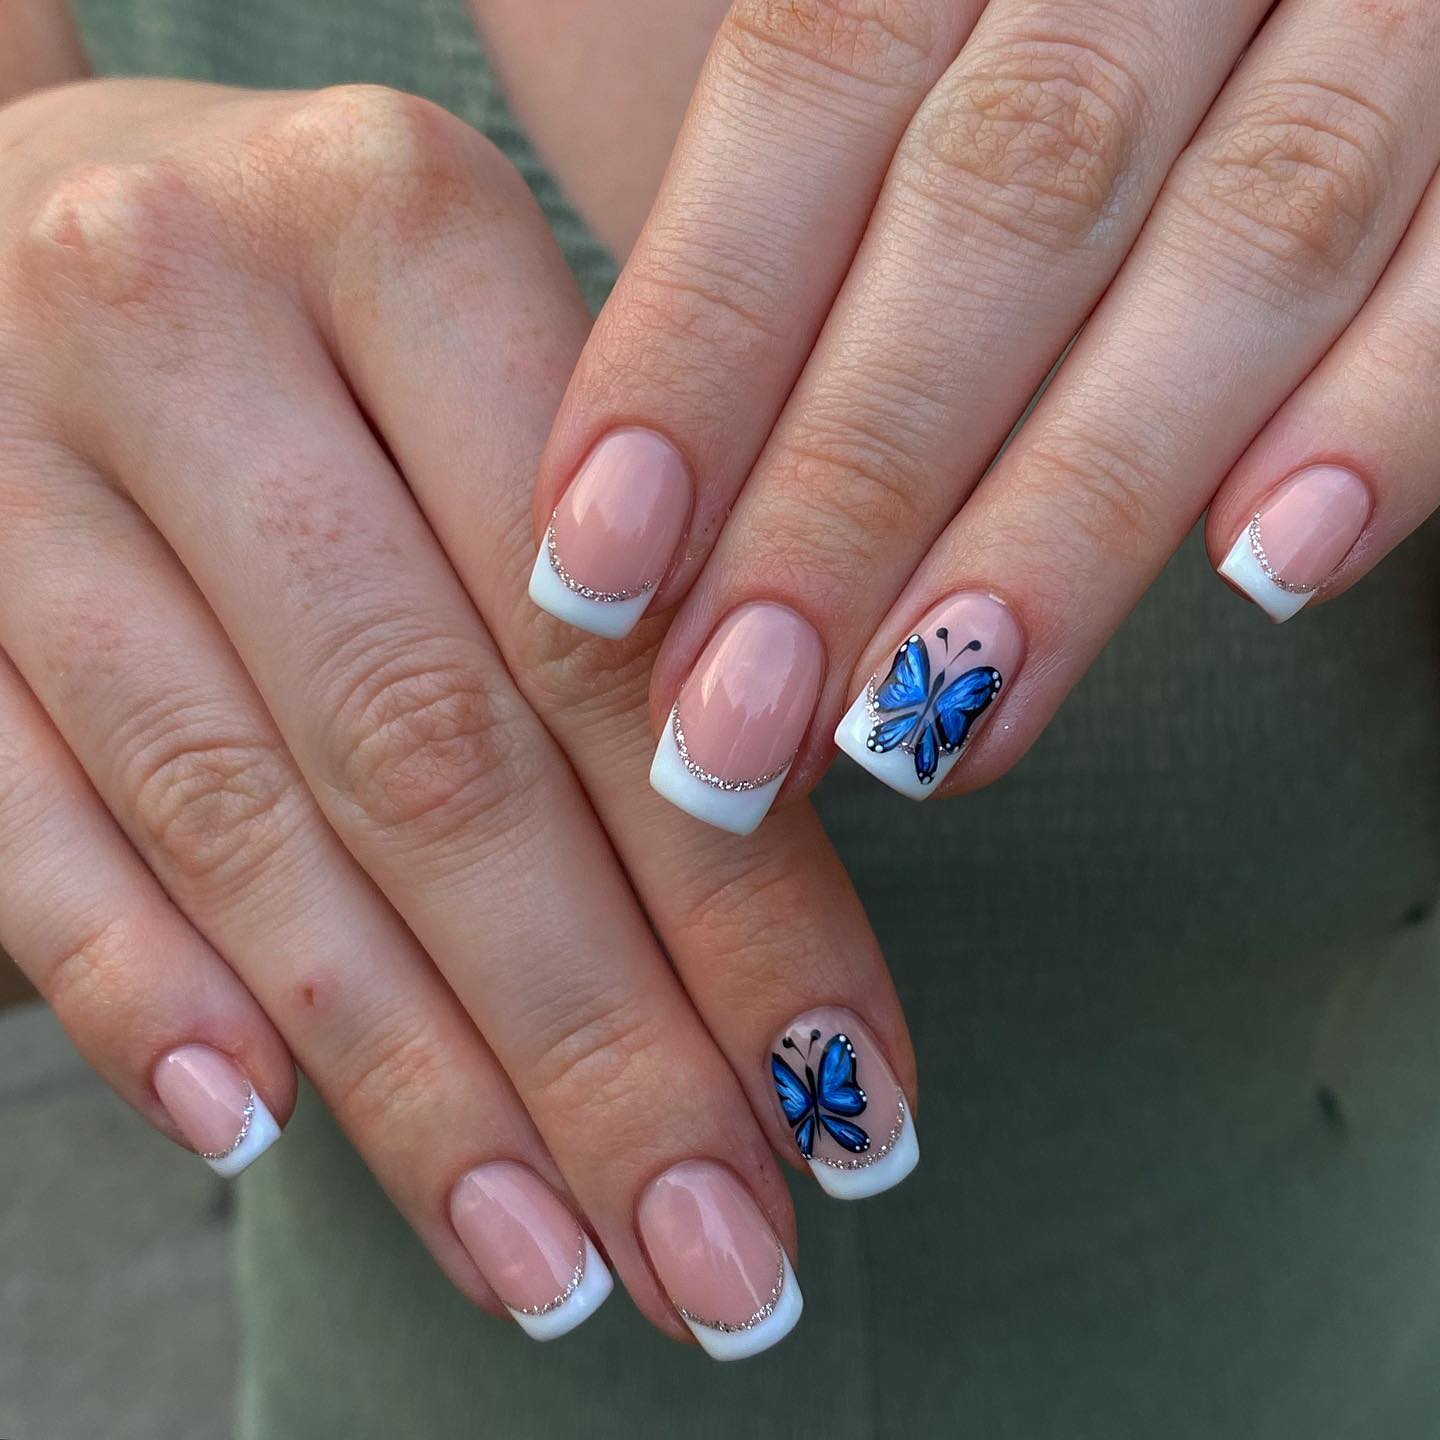 A french manicure with some silvery lines looks pretty. If there are two blue butterflies on it, it will be prettier.